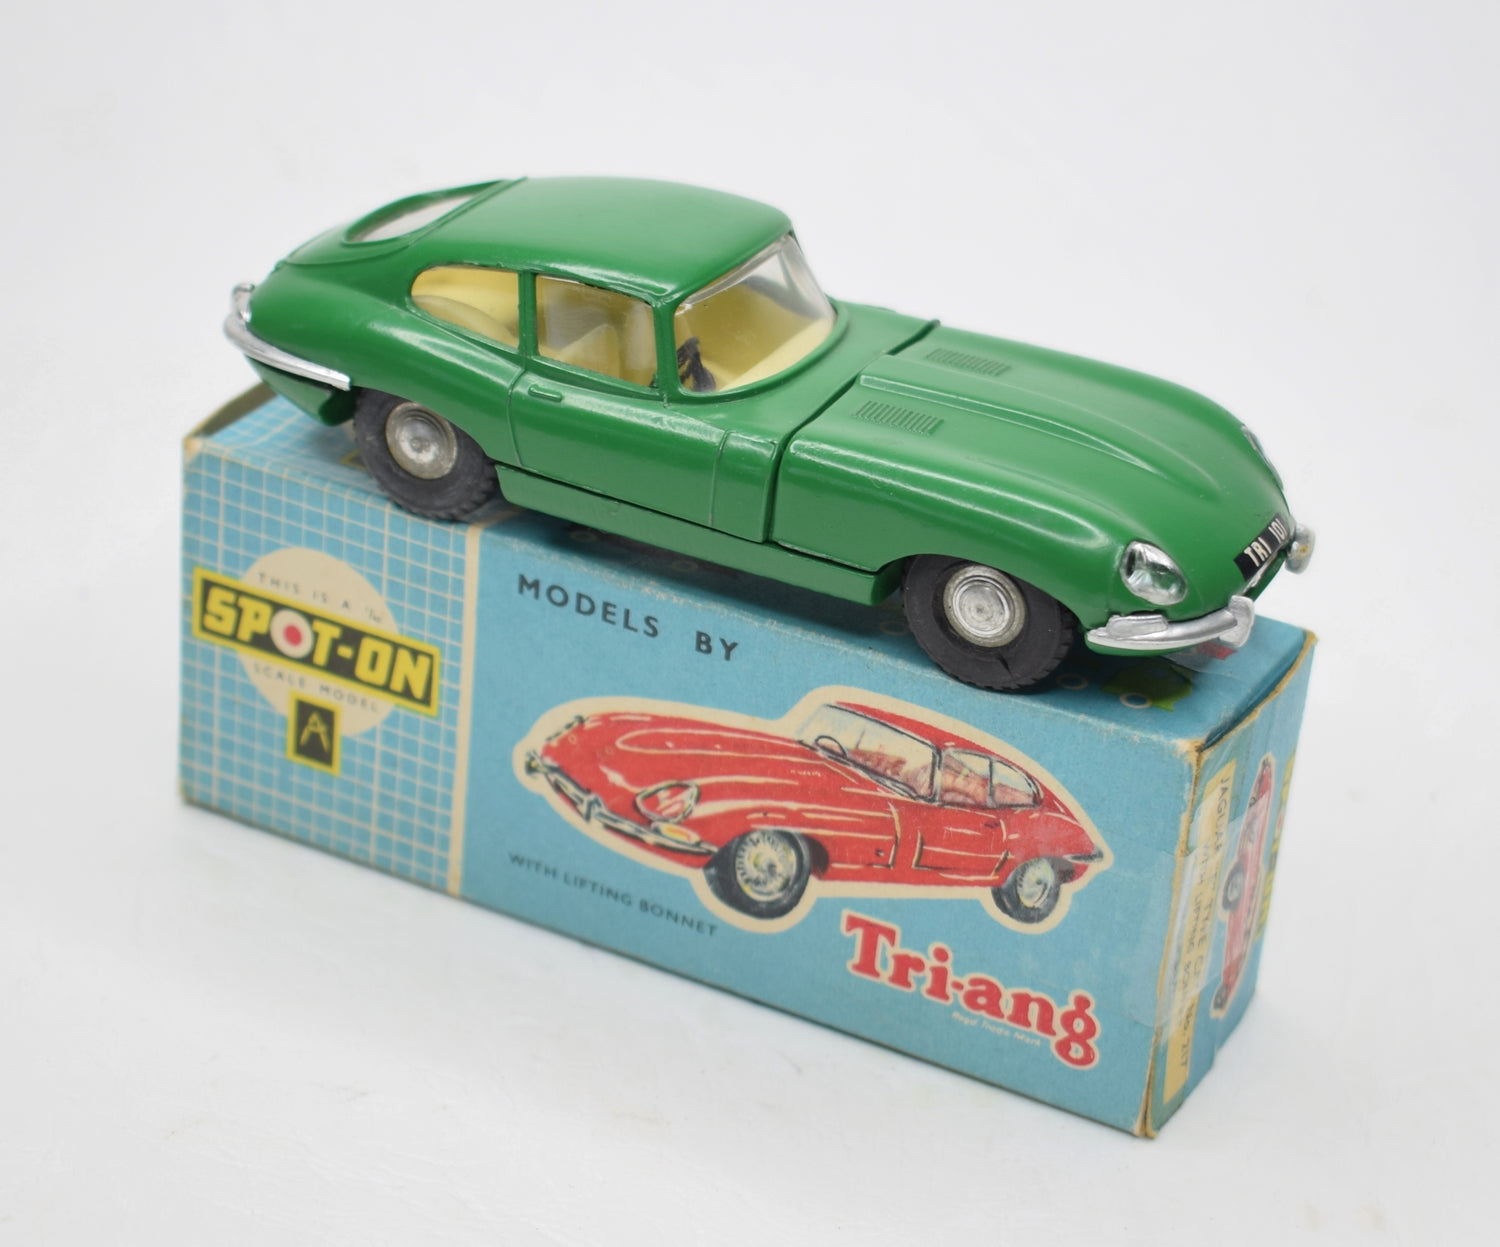 Spot-on 217 E Type Very Near Mint/Boxed (Bright Green).